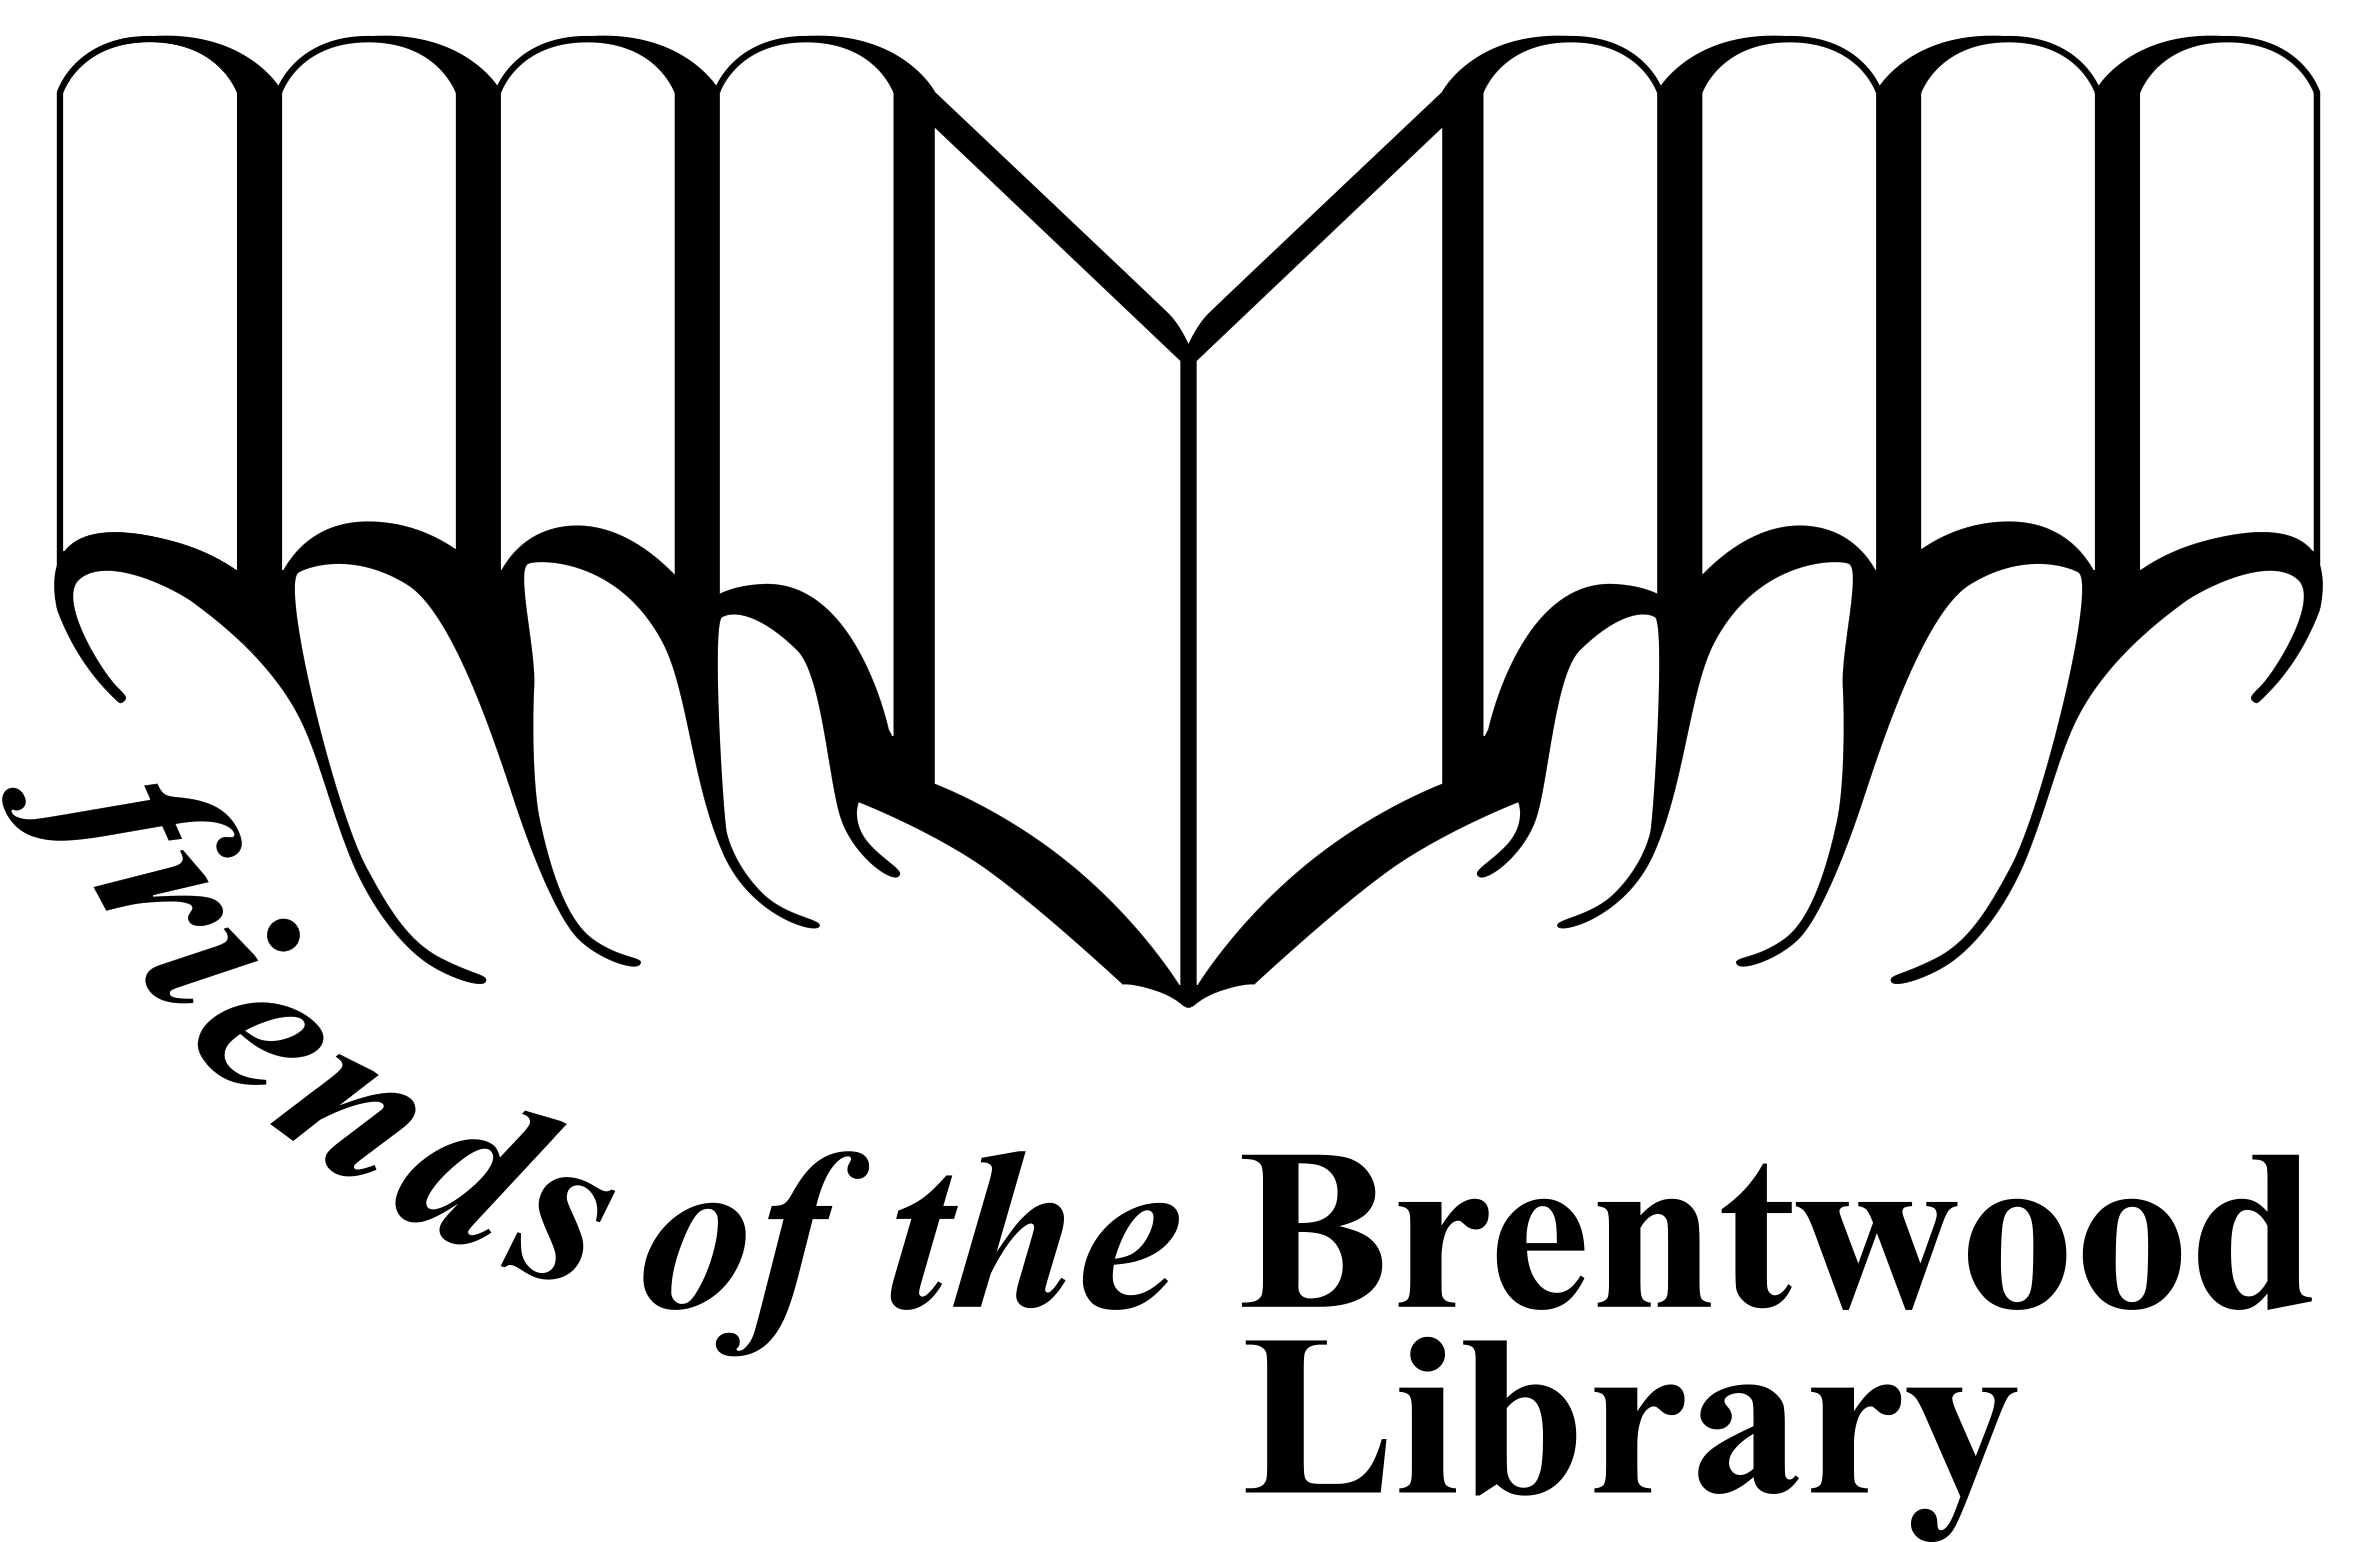 Friends of the Brentwood Library logo, Brentwood, CA